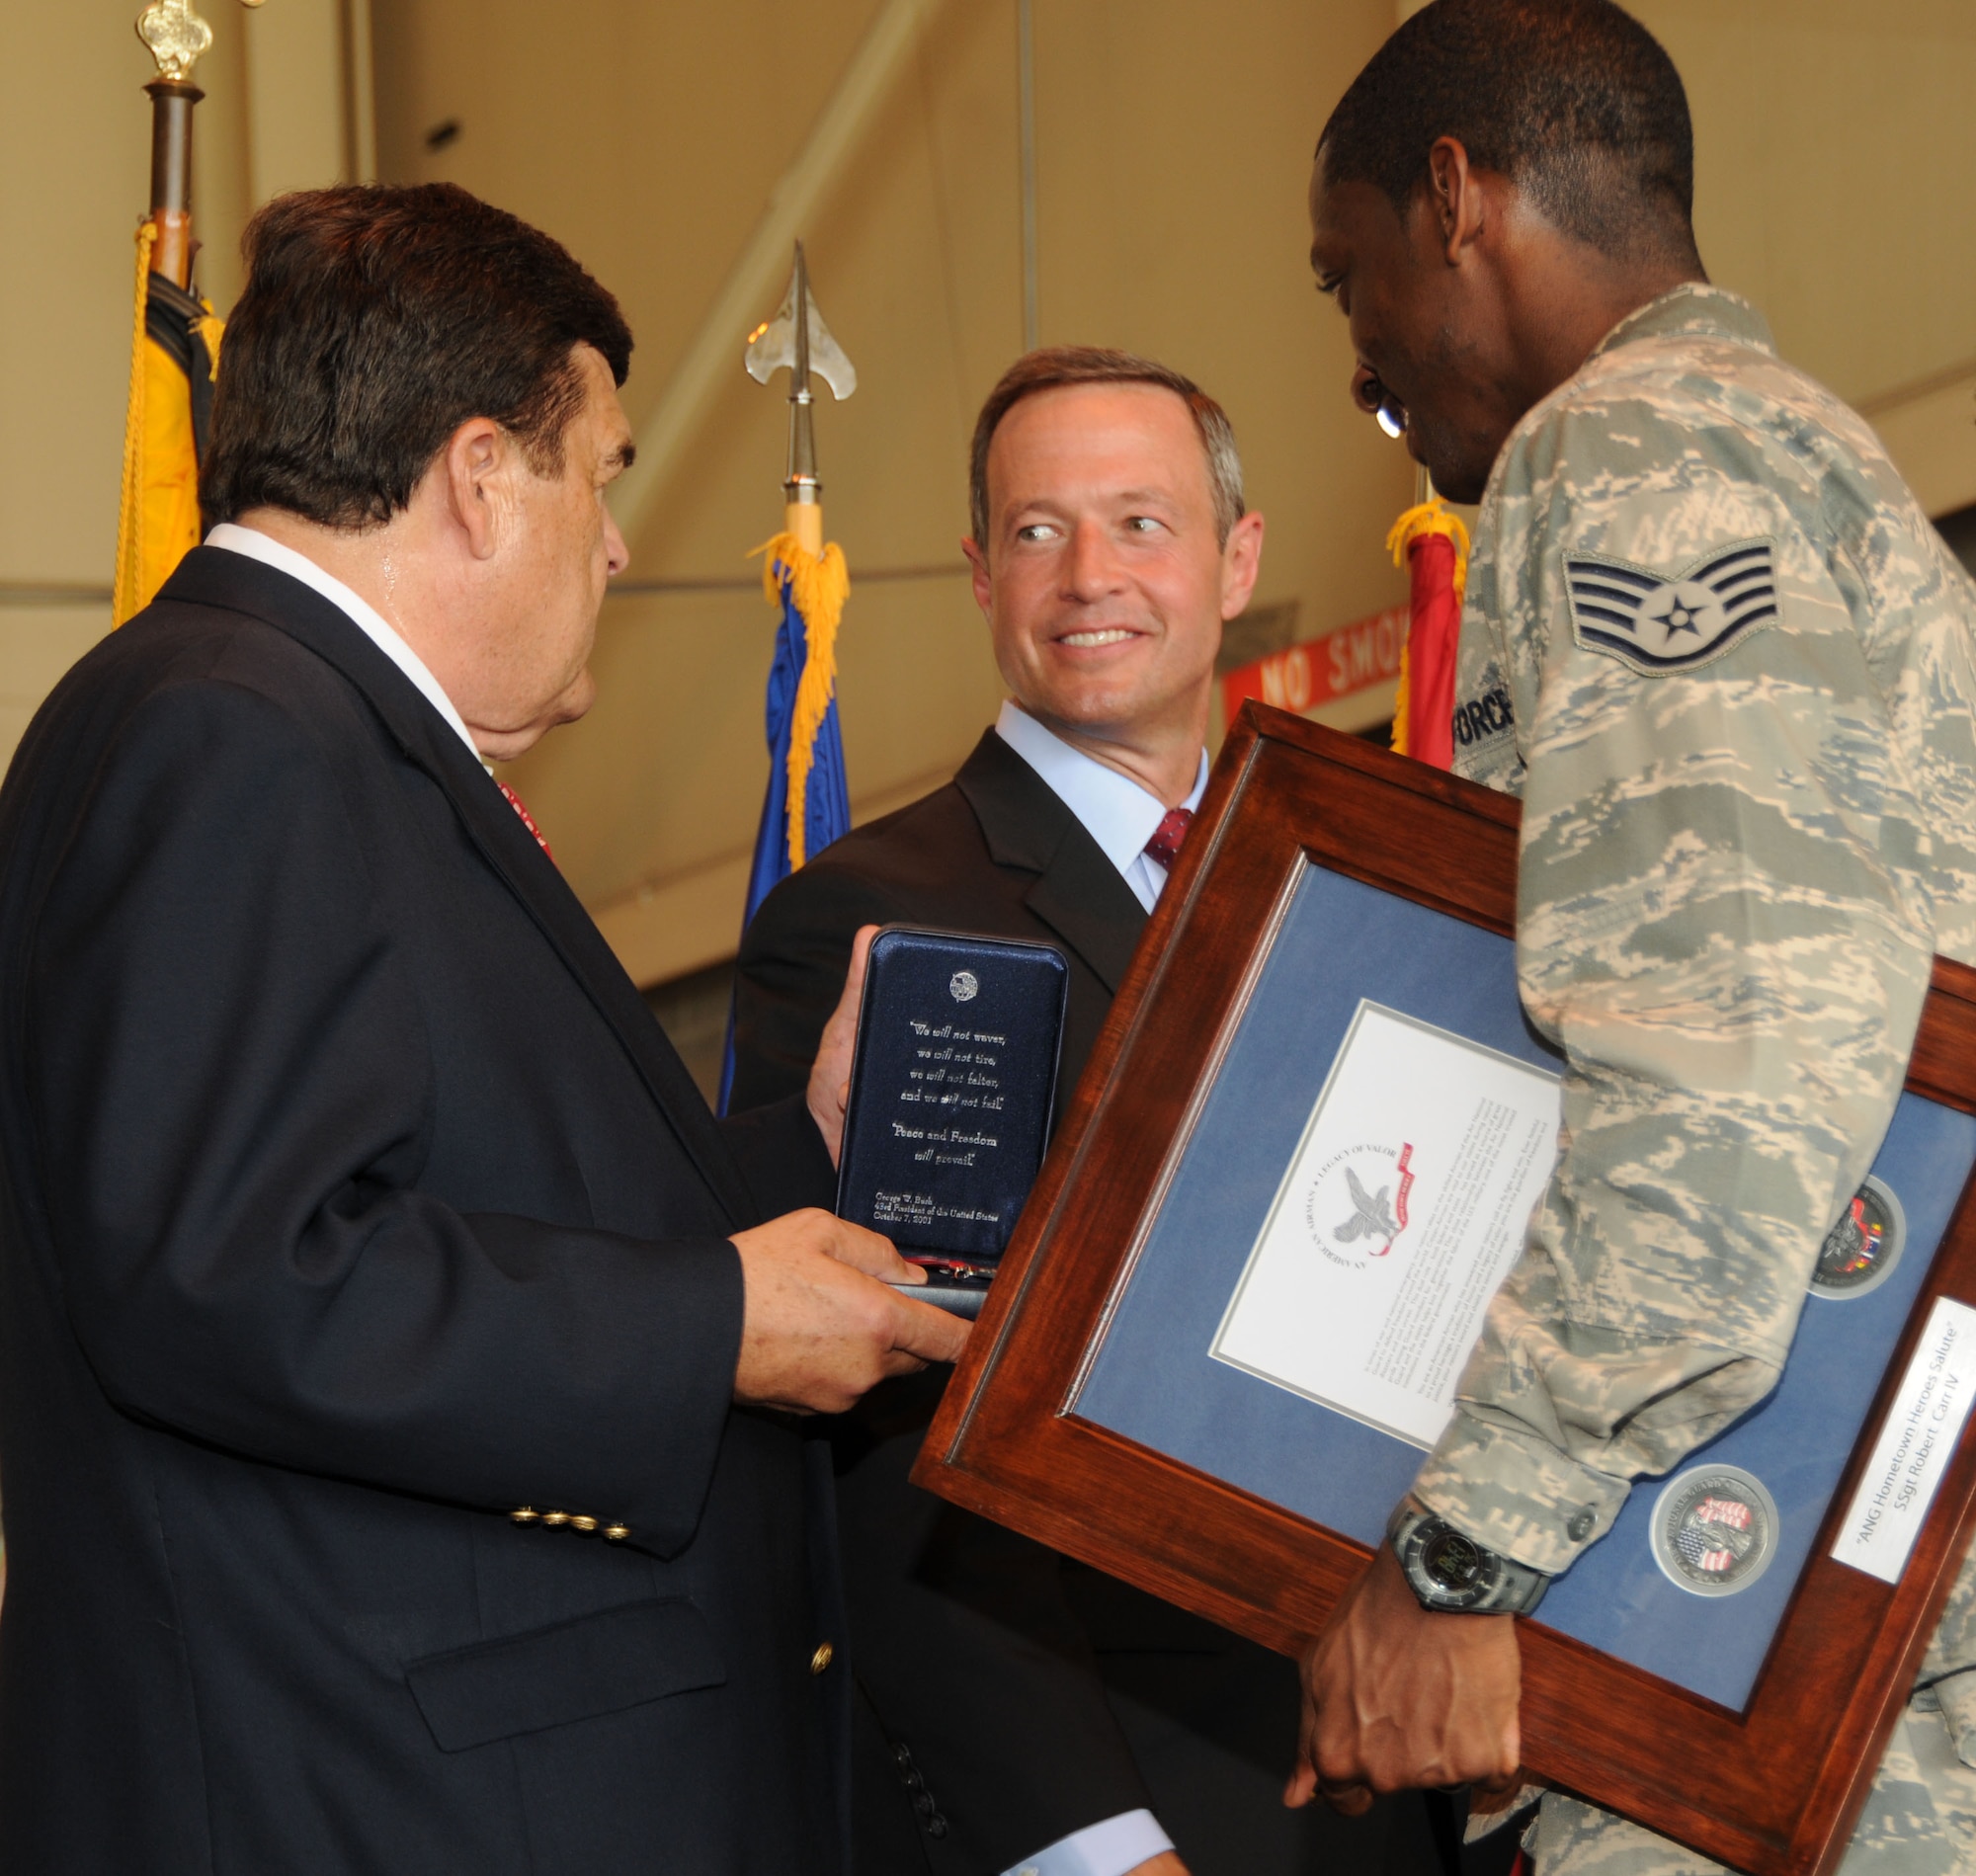 Rep. Dutch Ruppersberger (left) and Maryland Gov. Martin O’Malley (center) recognize Staff Sgt. Robert Carr, 135th Airlift Squadron, for his 2006 overseas service during a ceremony at Warfield Air National Guard Base, Baltimore, Md., June 13, 2010.  The men and women of the 175th Wing were commended for their service in the Global War on Terrorism over the past ten years. (U.S. Air Force photo by Tech Sgt. Chris Schepers/Released) 